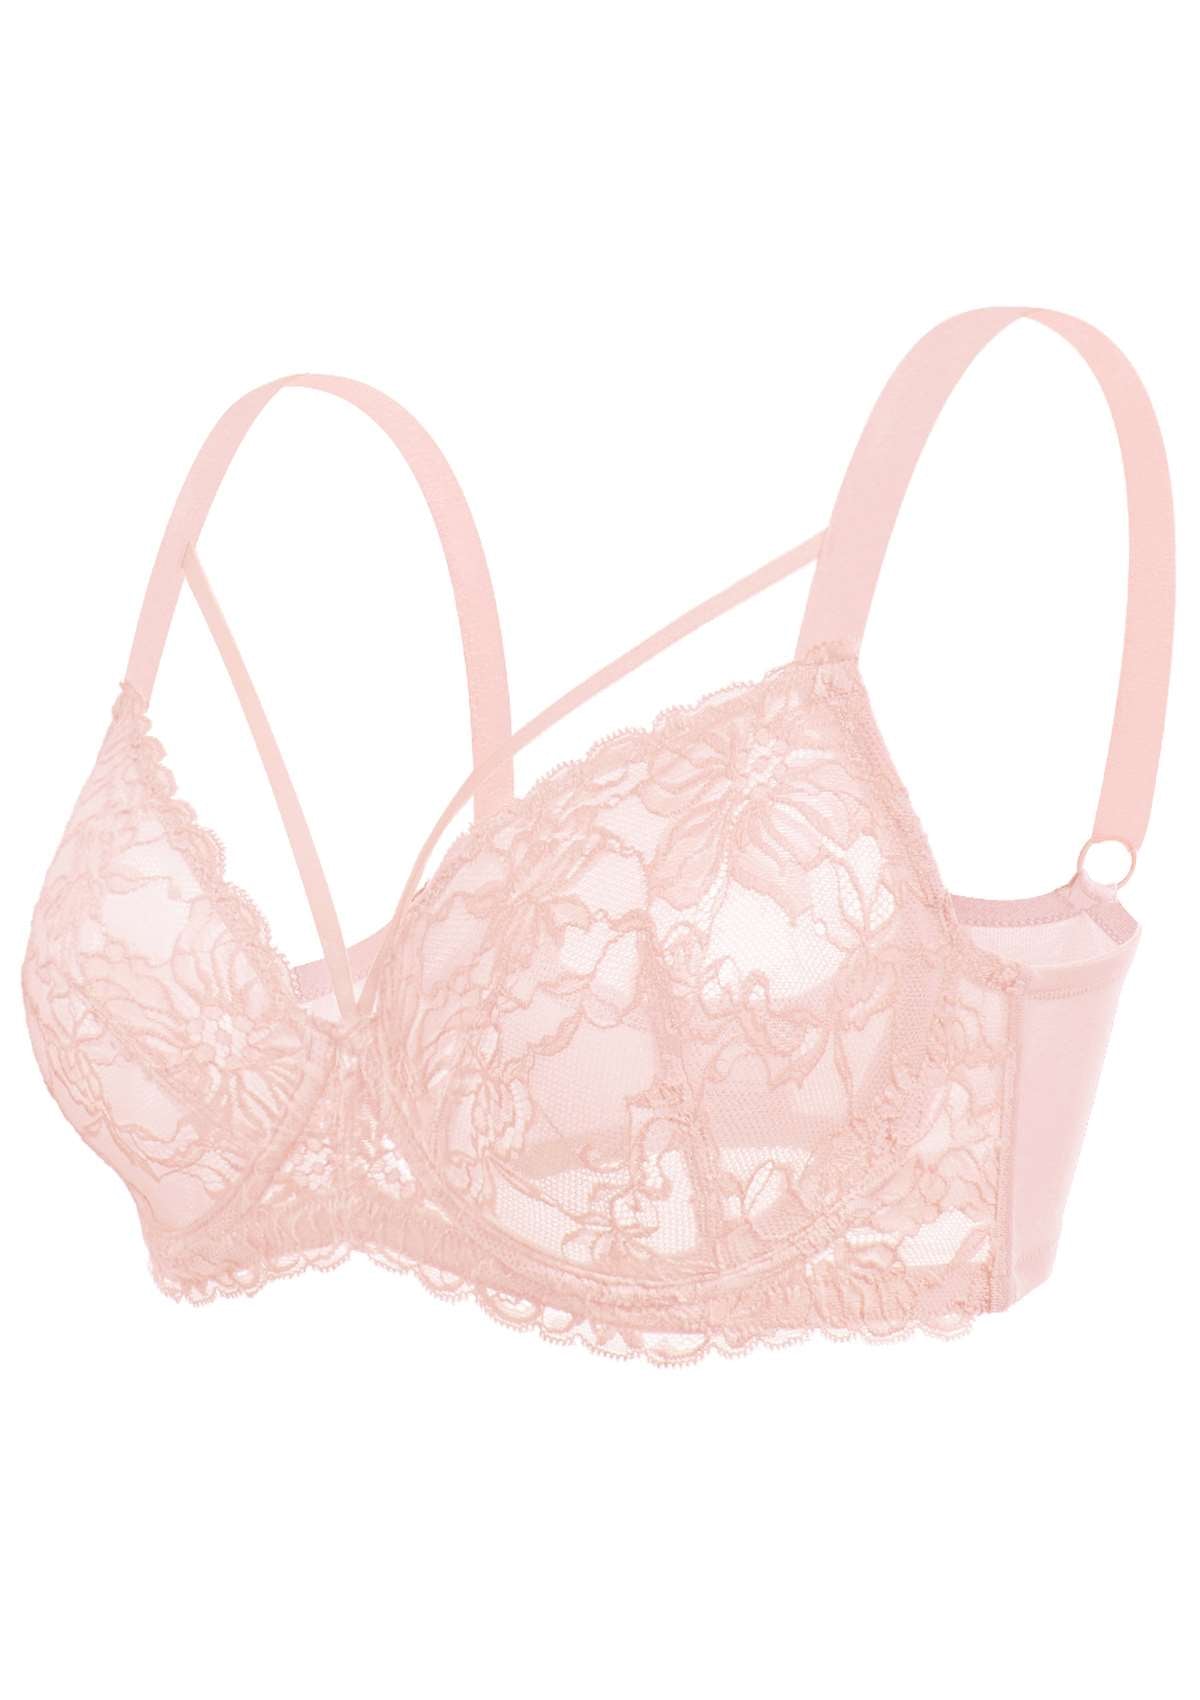 HSIA Pretty In Petals: Strappy Lace Sheer Bra For Side And Back Fat - Baby Pink / 46 / D